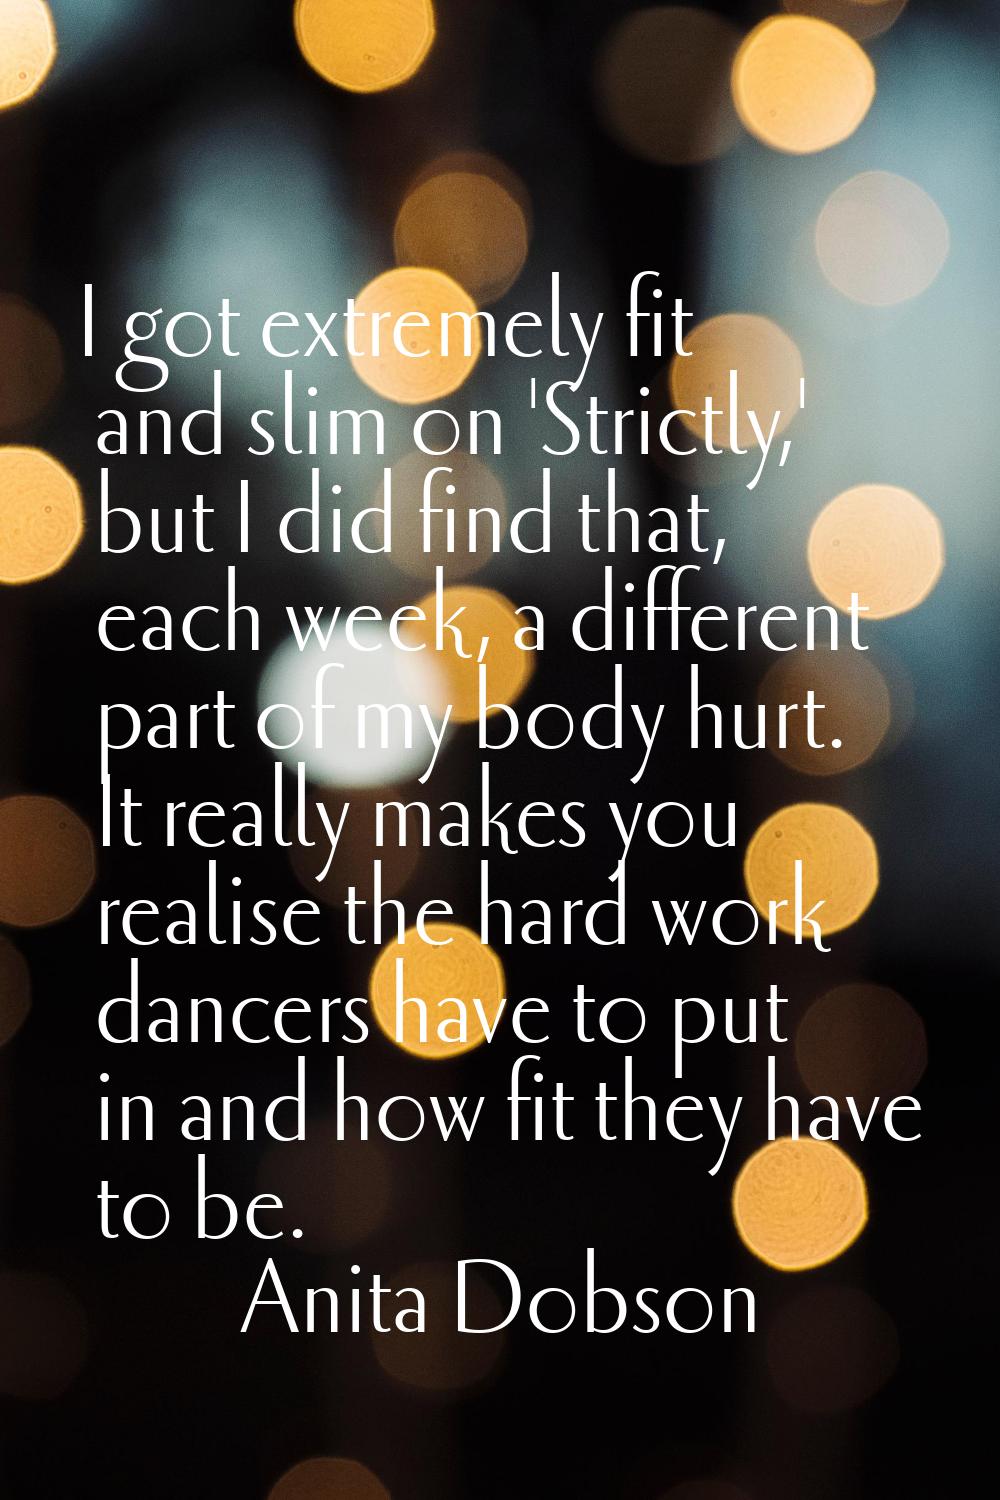 I got extremely fit and slim on 'Strictly,' but I did find that, each week, a different part of my 